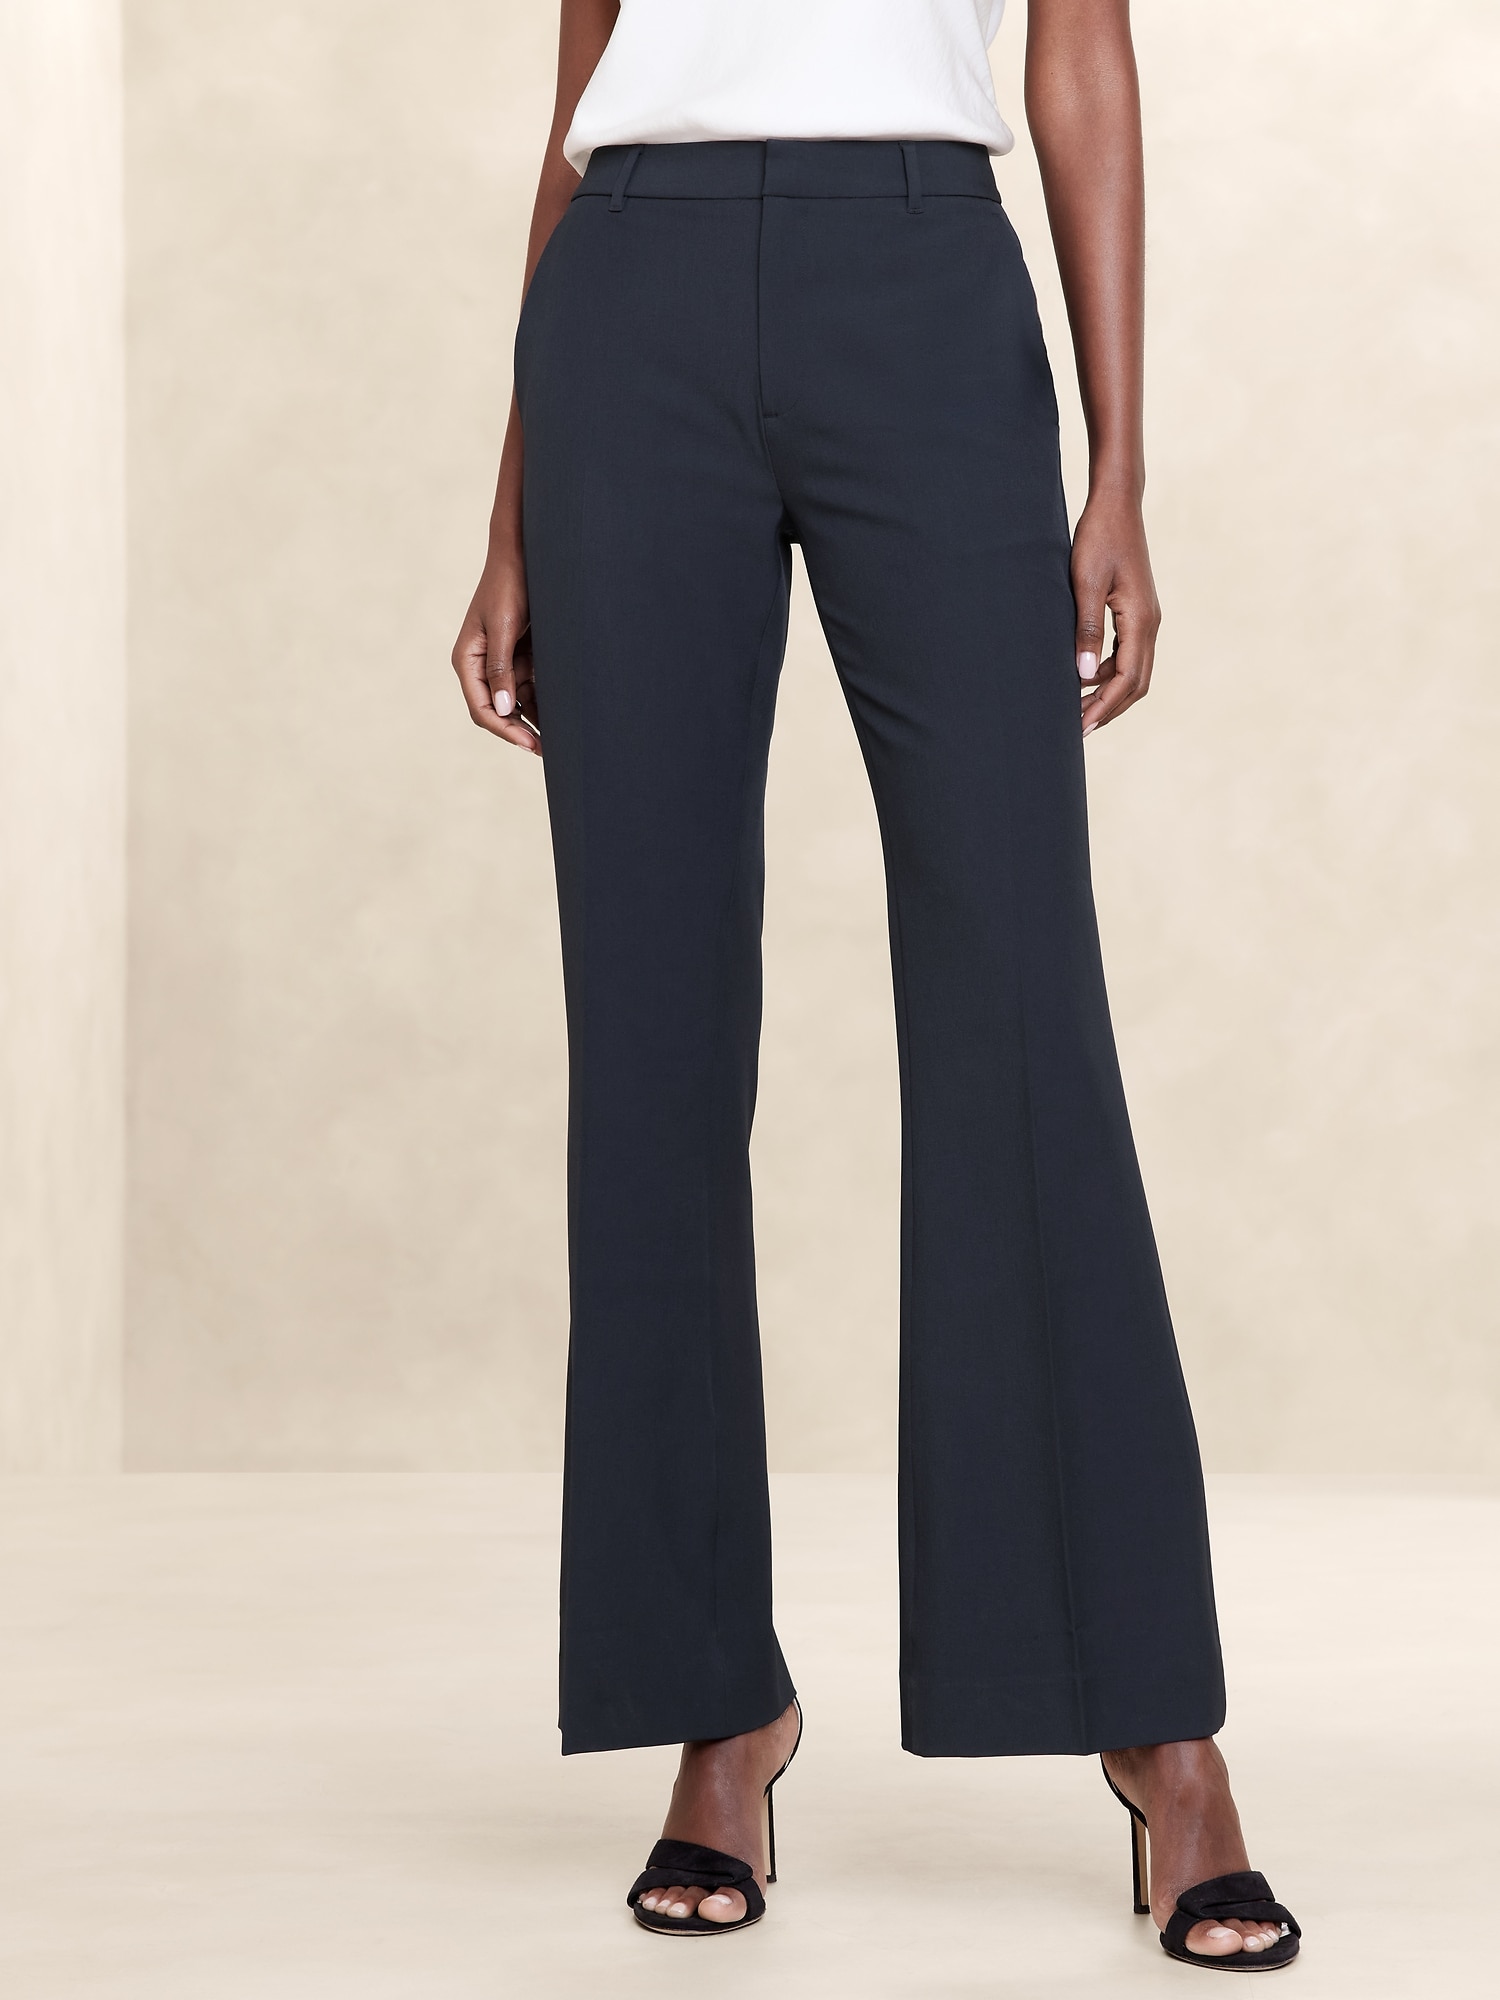 Buy NUSH Womens Printed Bootcut Trousers | Shoppers Stop